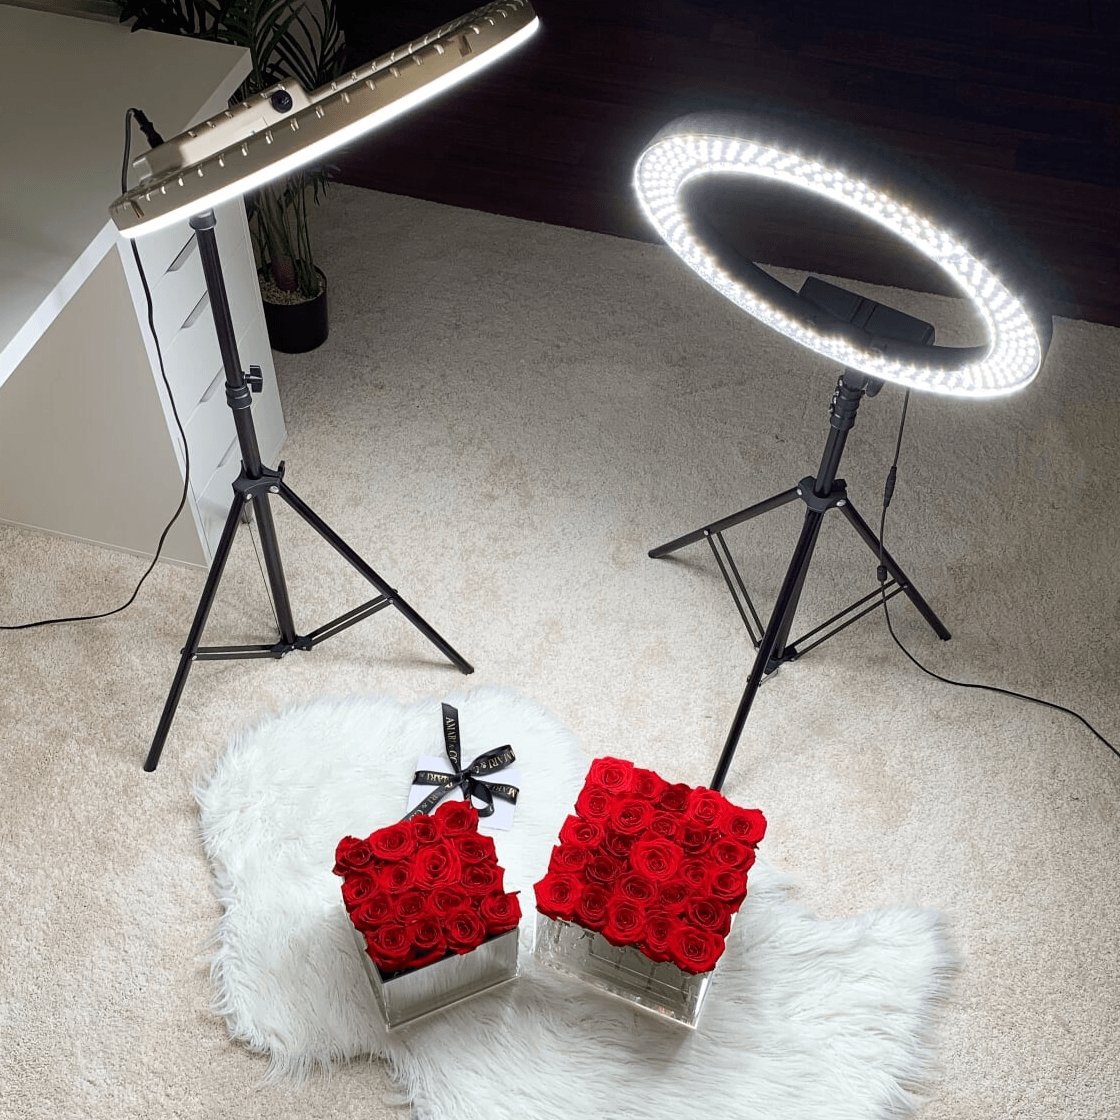 EMART 12 inch LED Ring Light with Tripod Stand & India | Ubuy